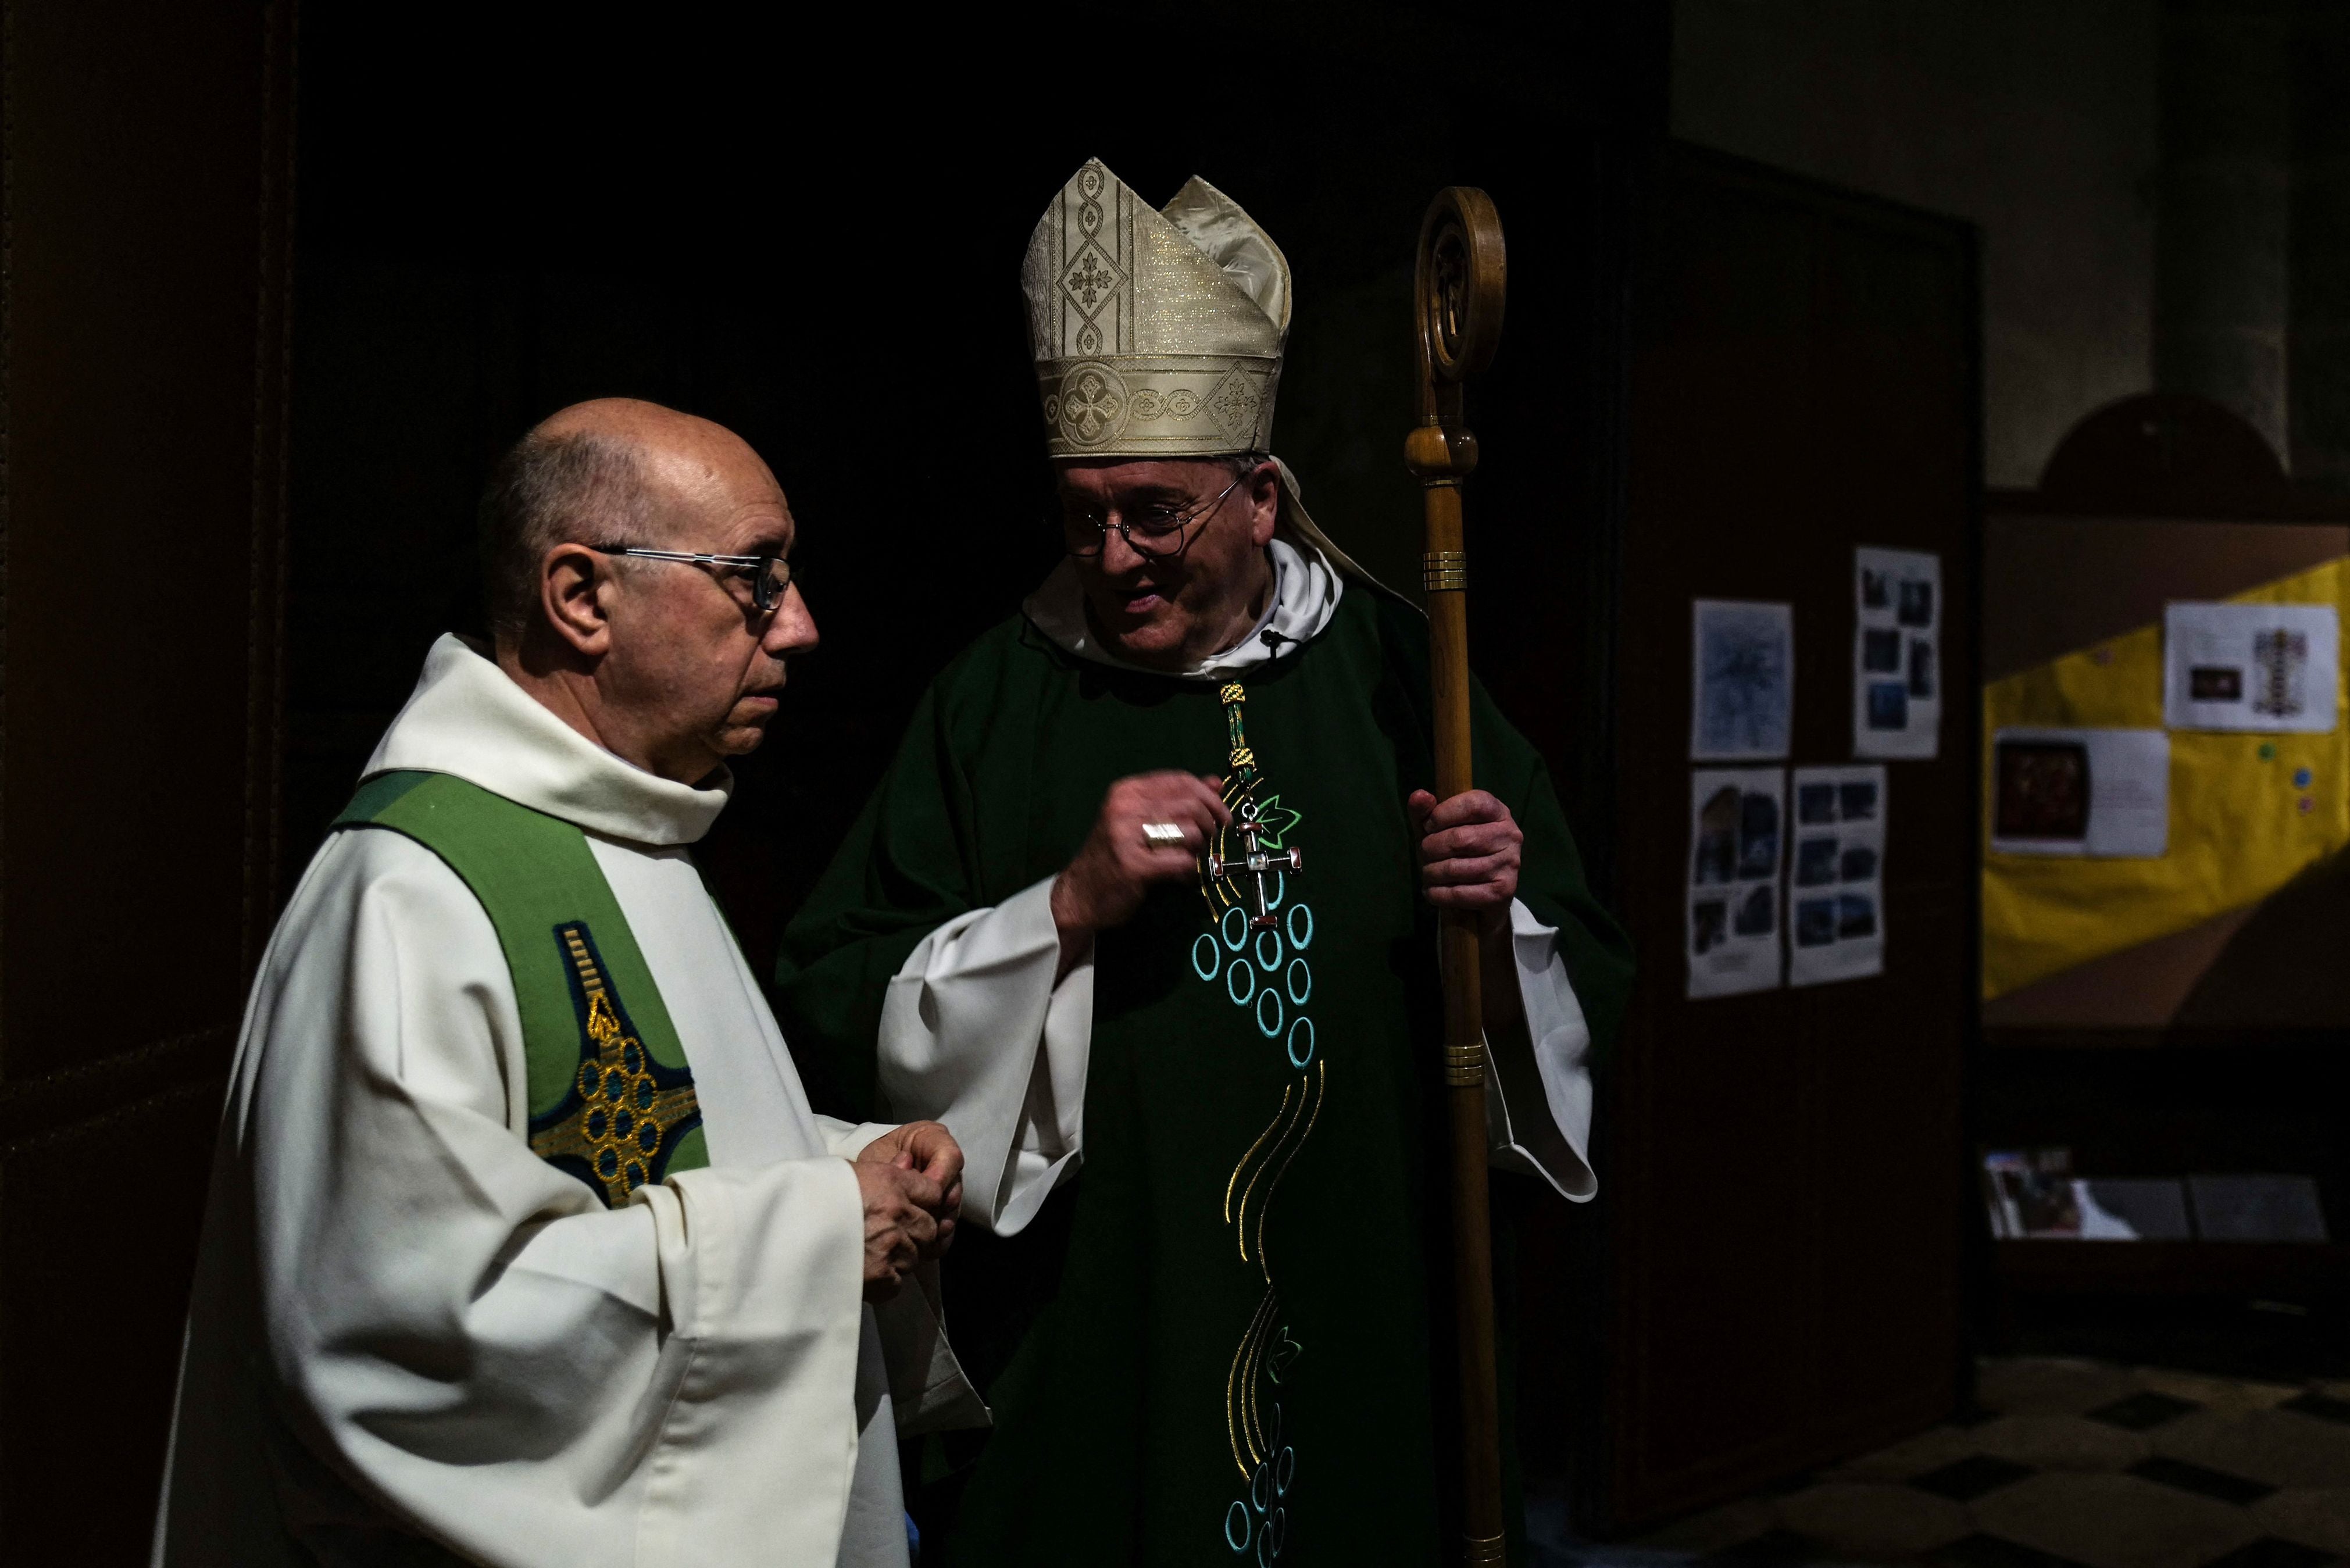 Father Didier Milani (L) speaks with Bishop Yves Le Saux (C) ahead of mass